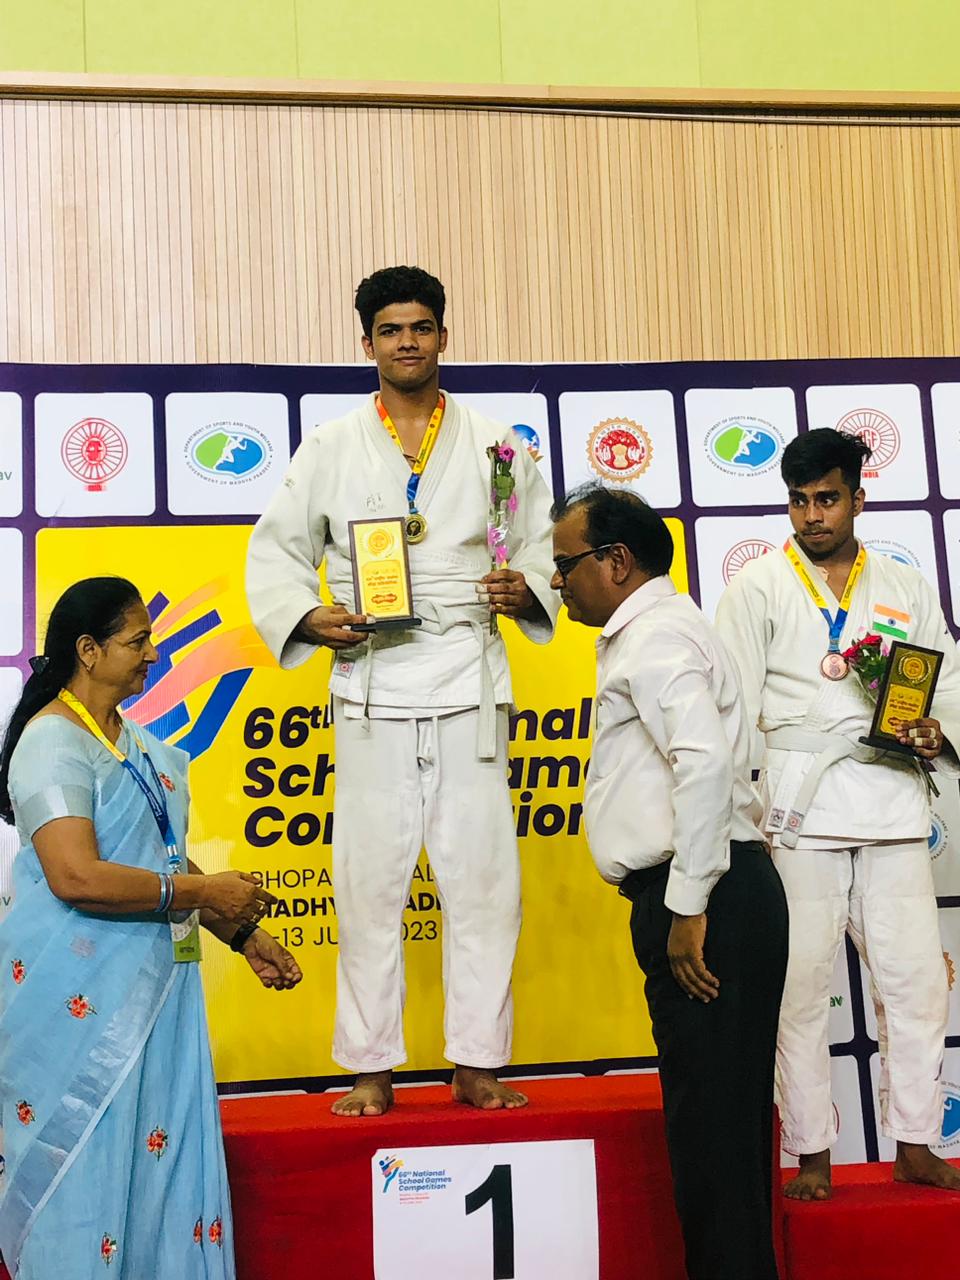 66th National School Games Competition